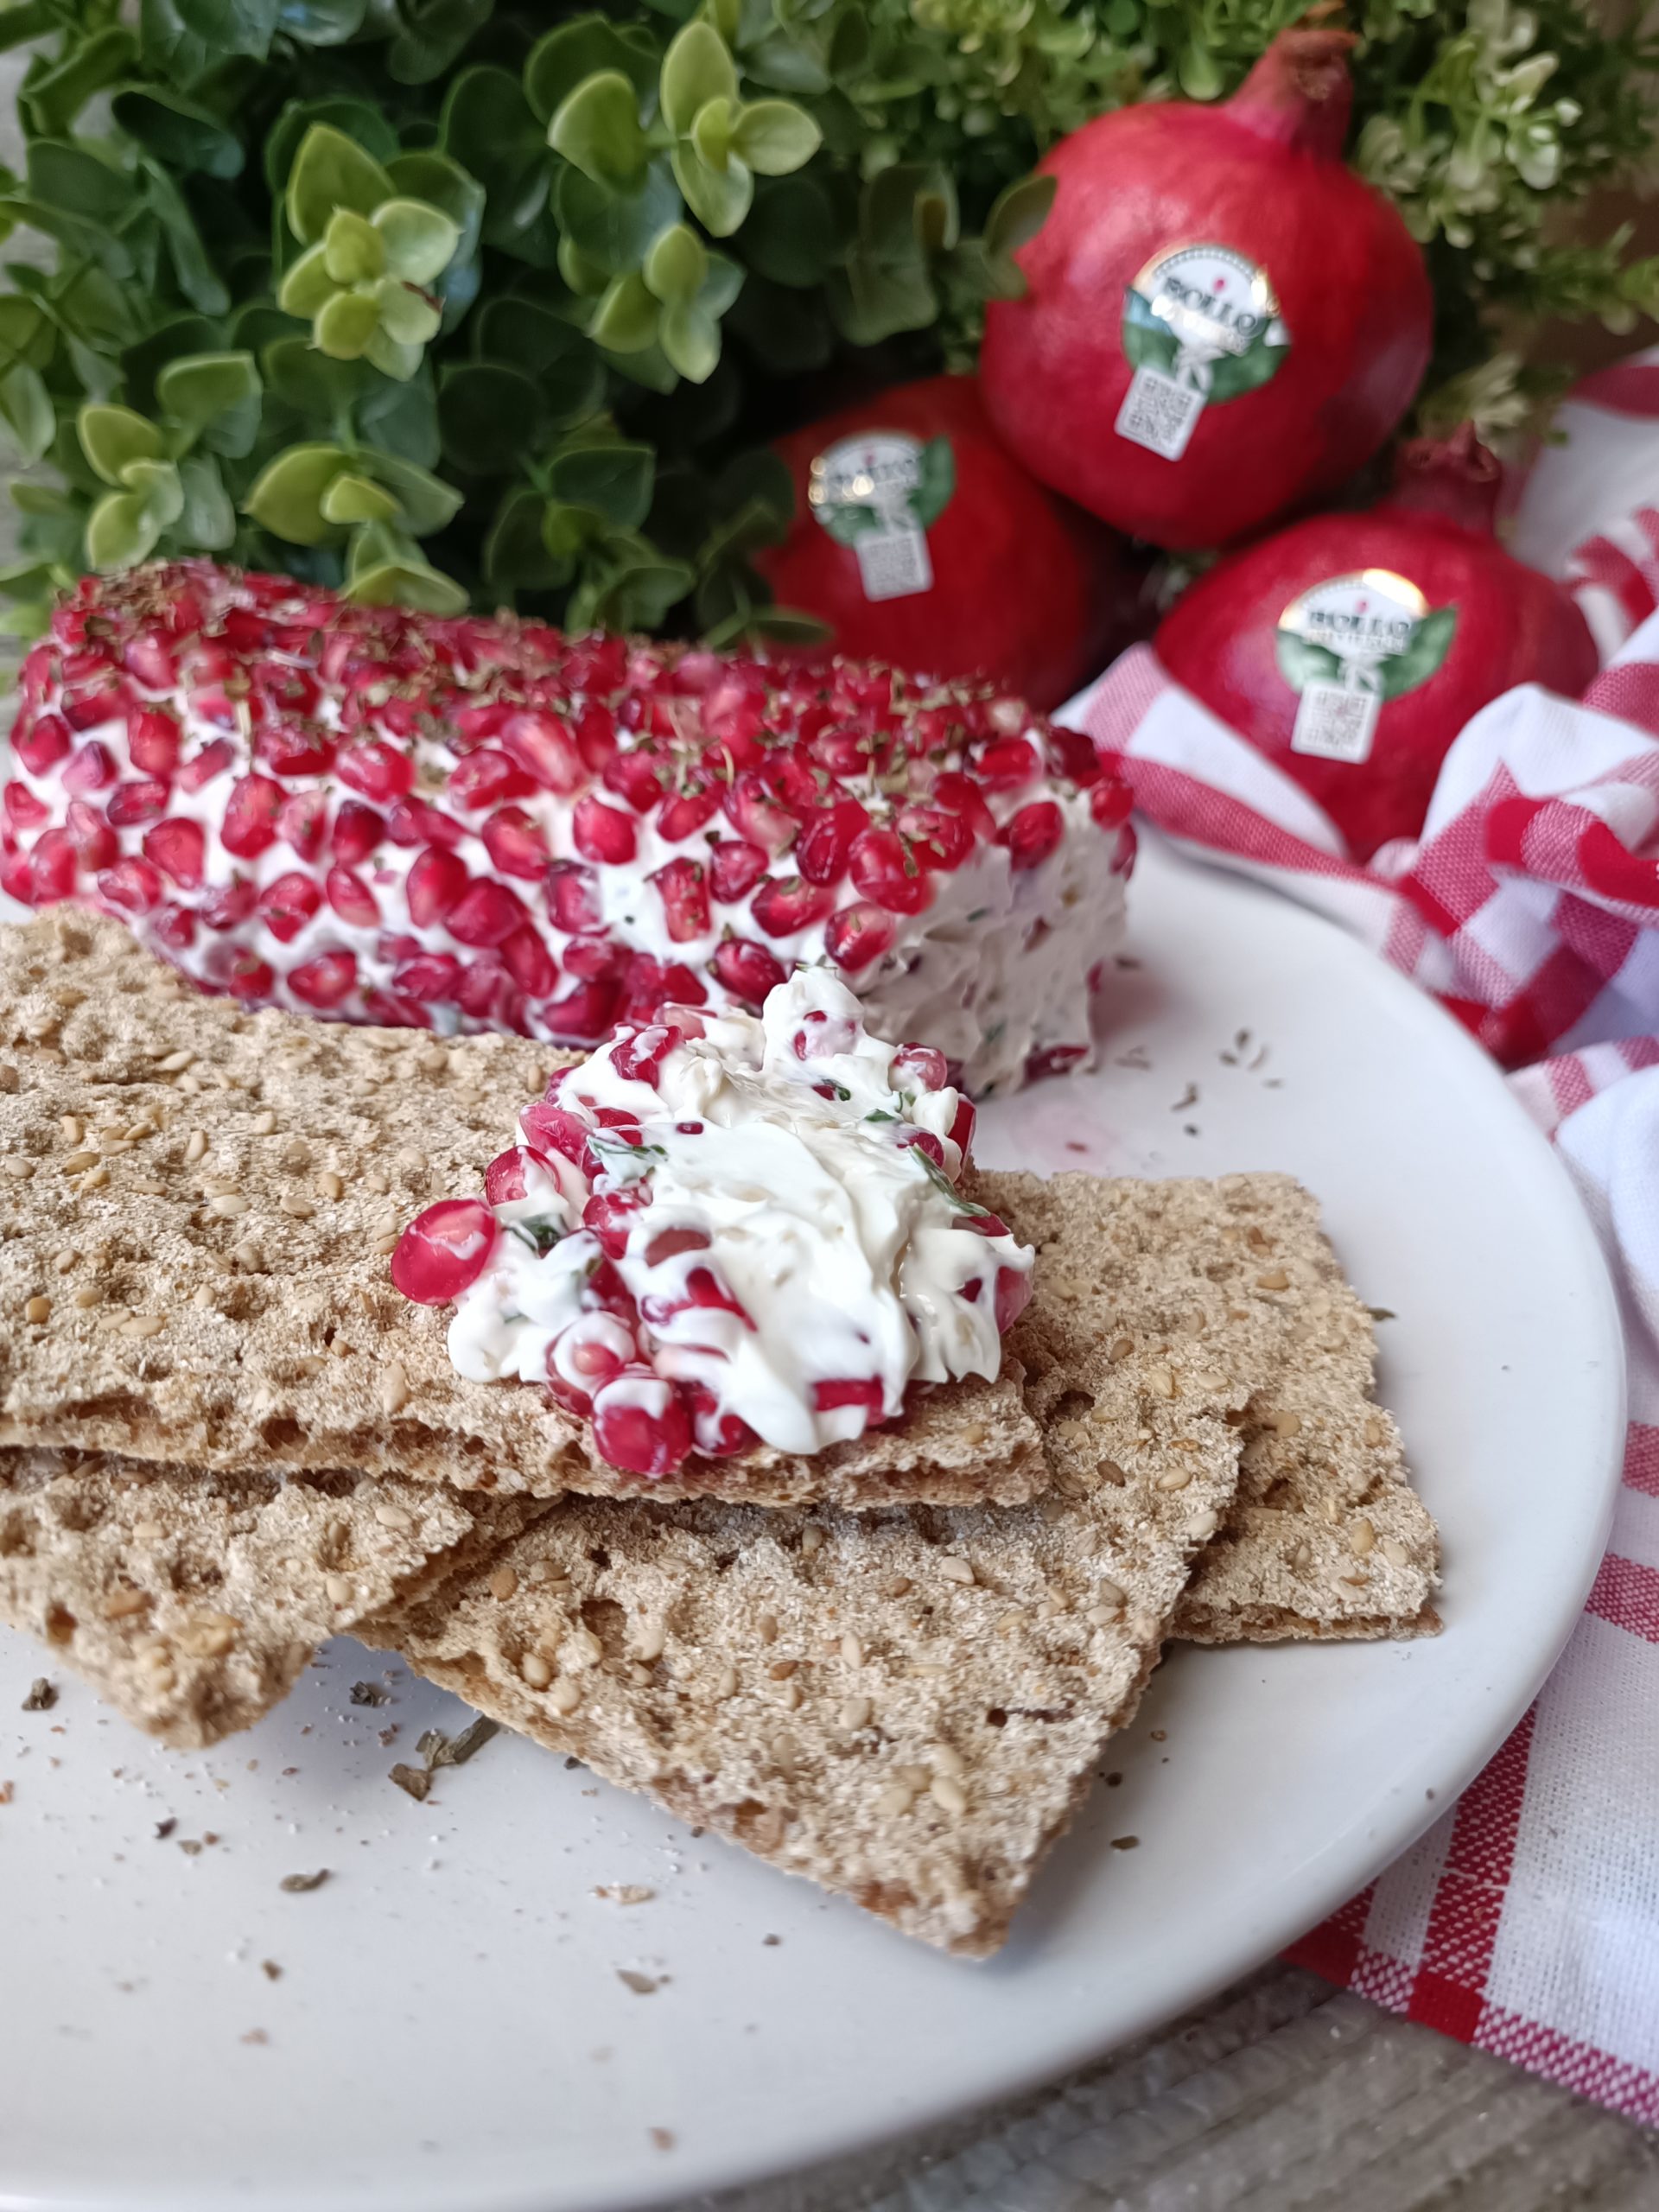 Cheese and pomegranate roll